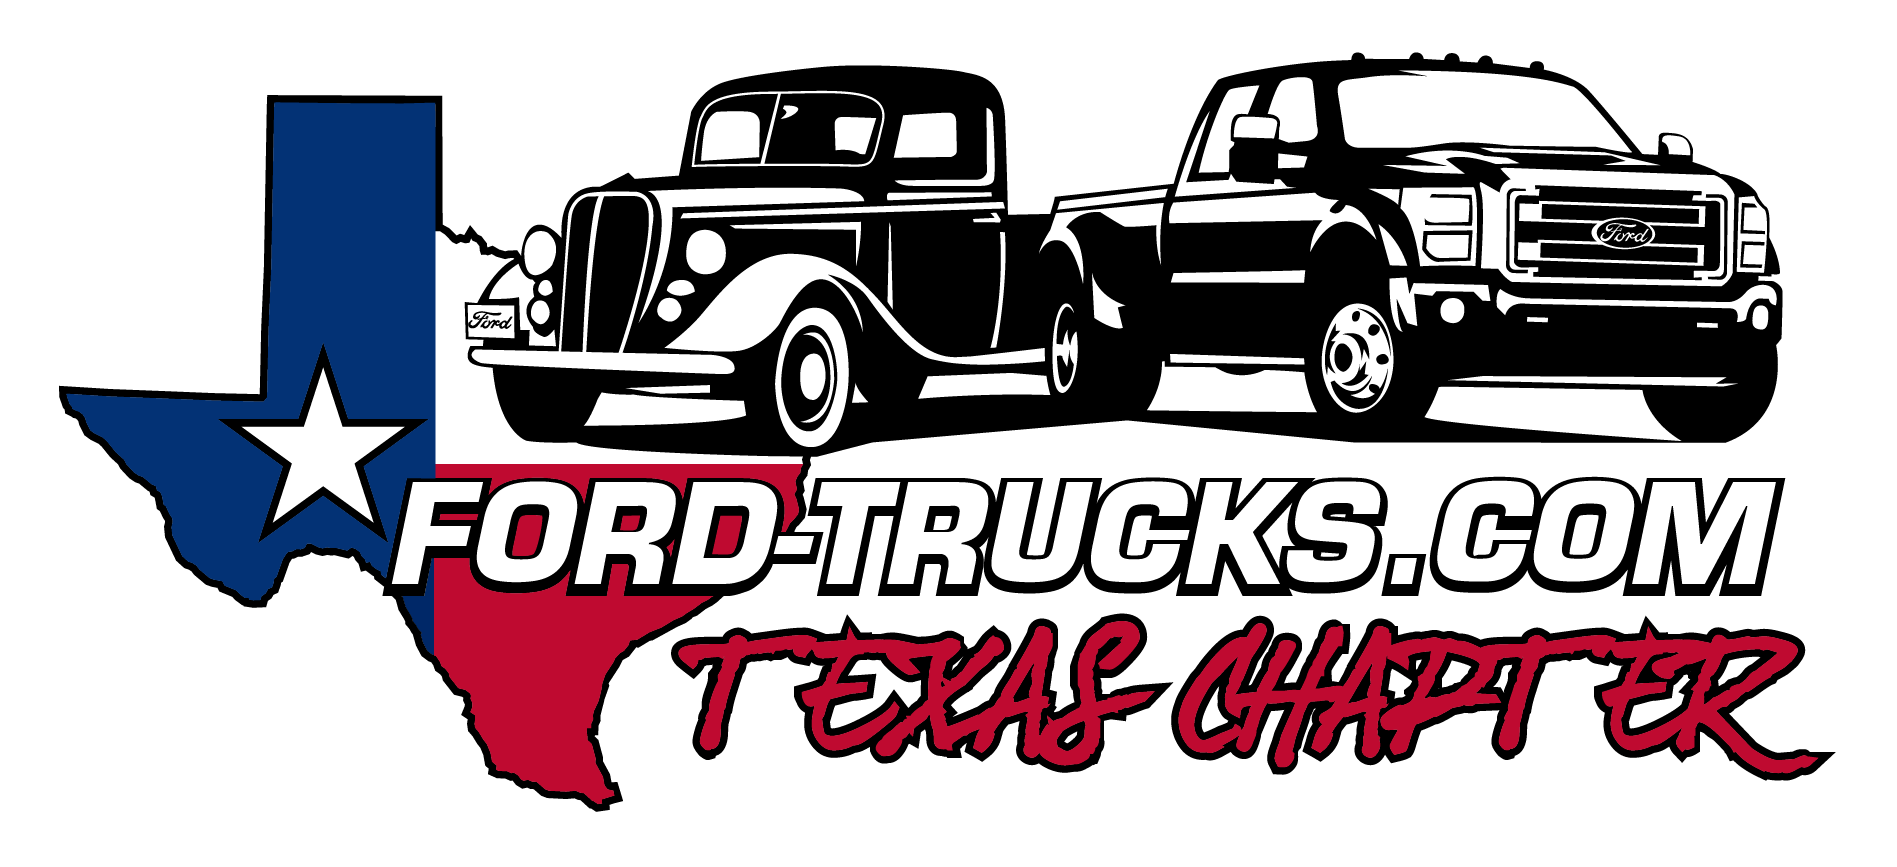 Time to pick a t-shirt logo! - Page 3 - Ford Truck Enthusiasts Forums